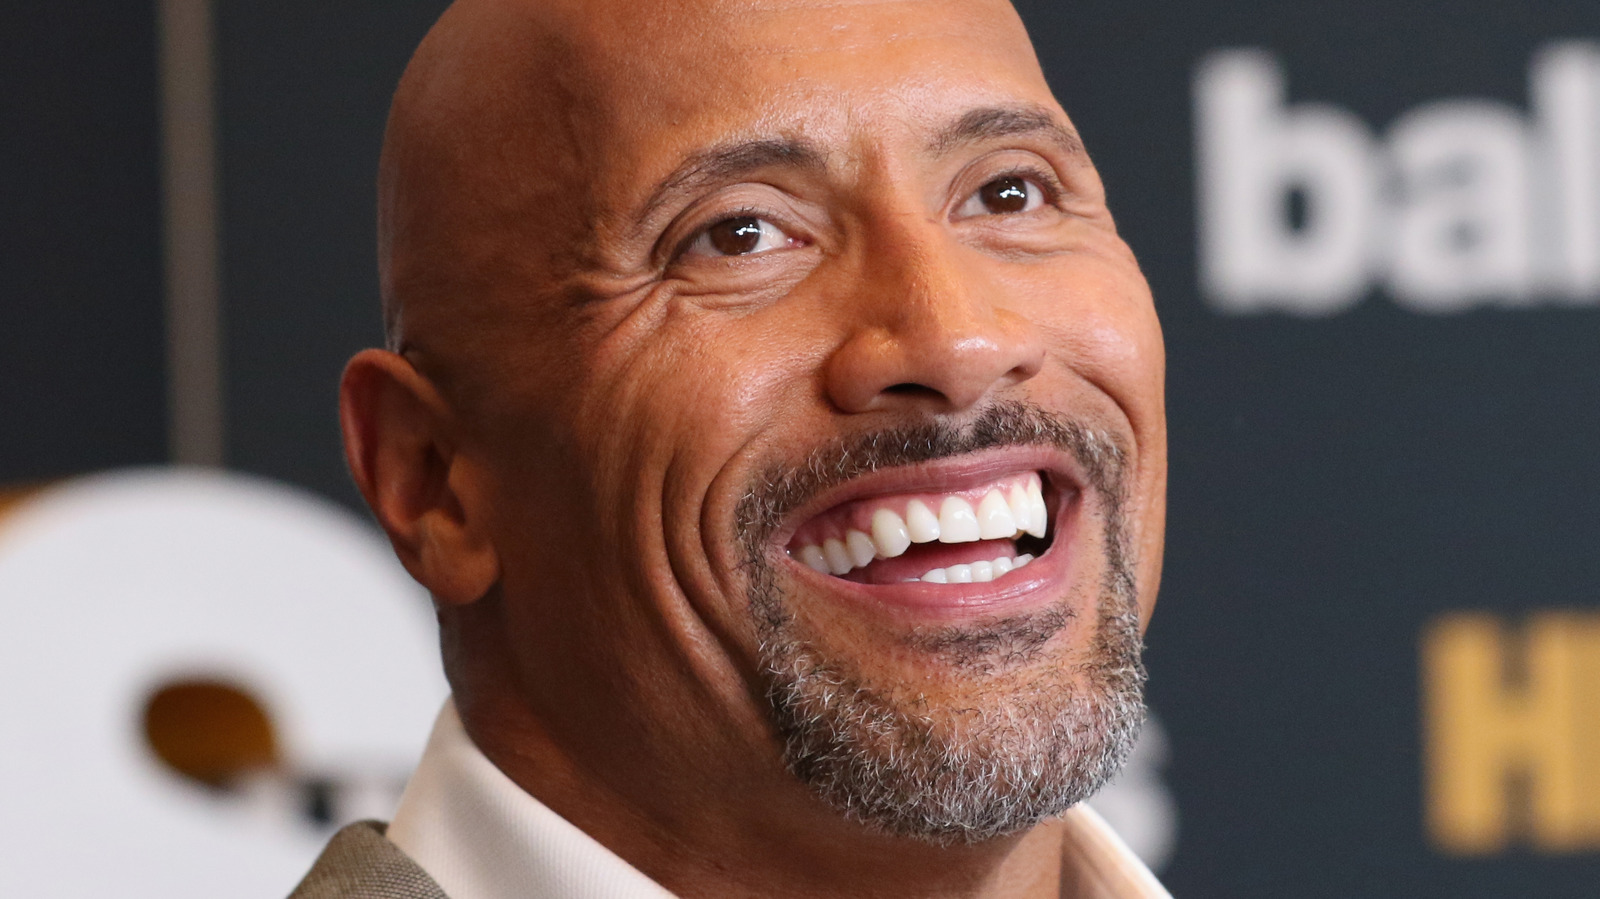 The Transformation Of Dwayne Johnson From 1 To 49 Years Old